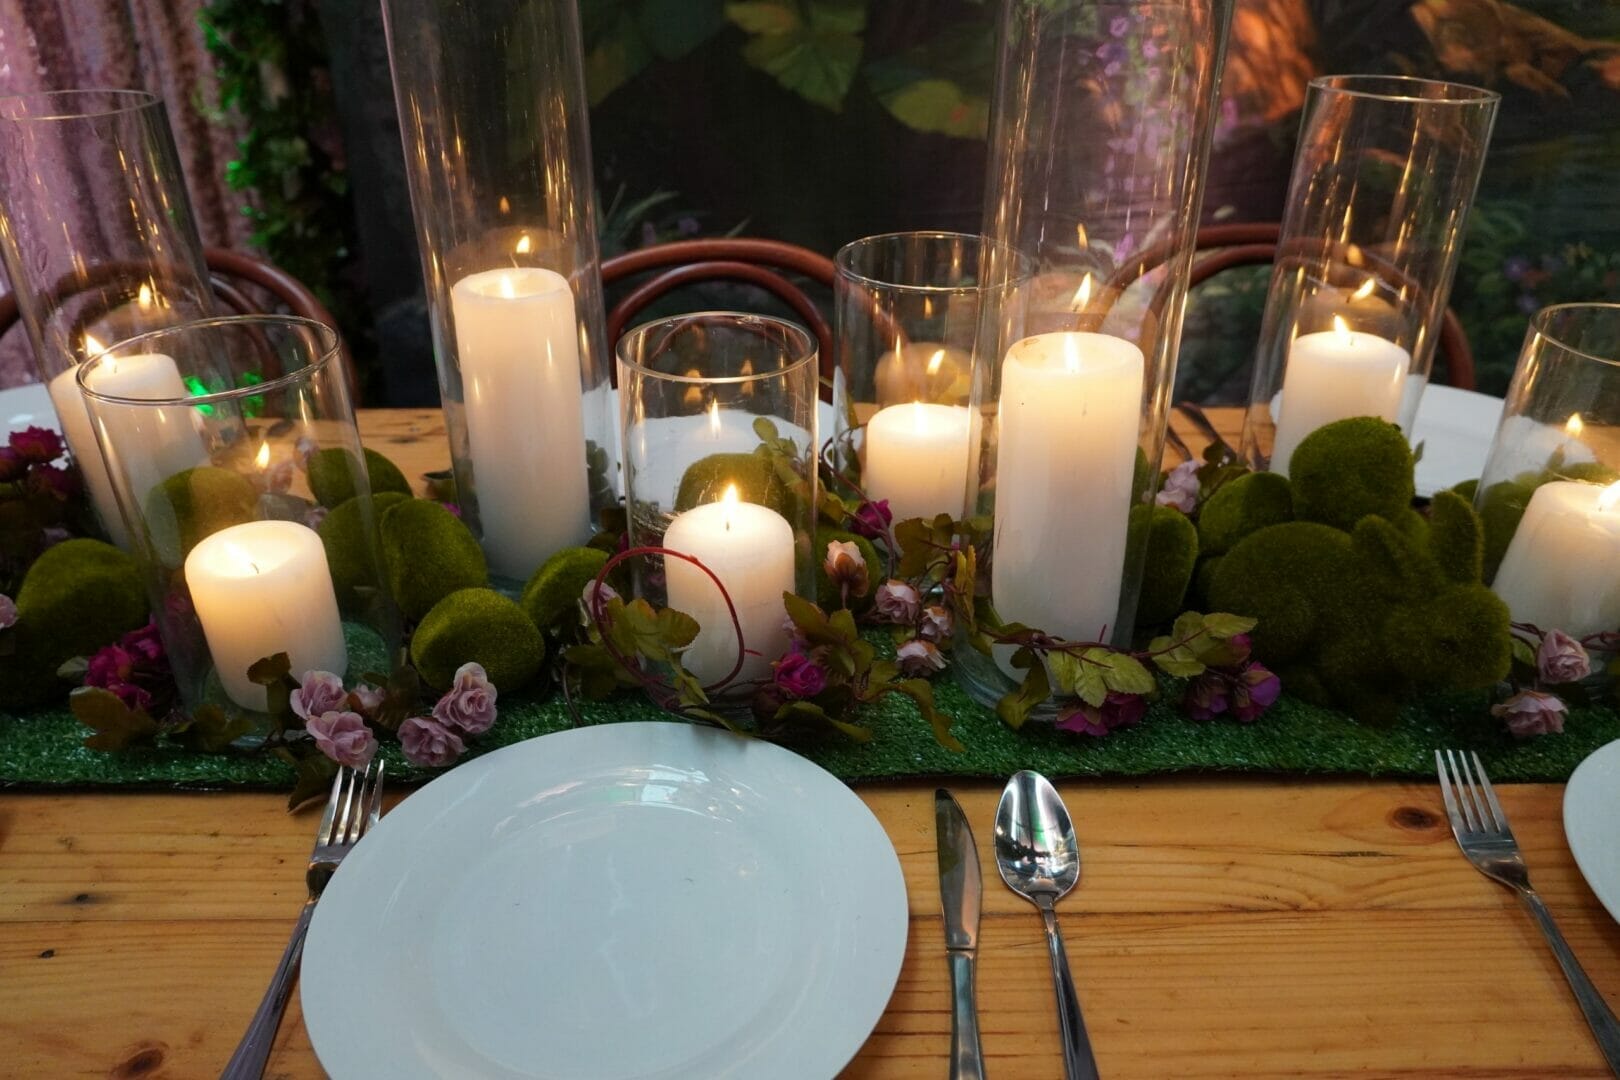 glass vases, candles, themed props, dinnerware in an enchanted garden themed event